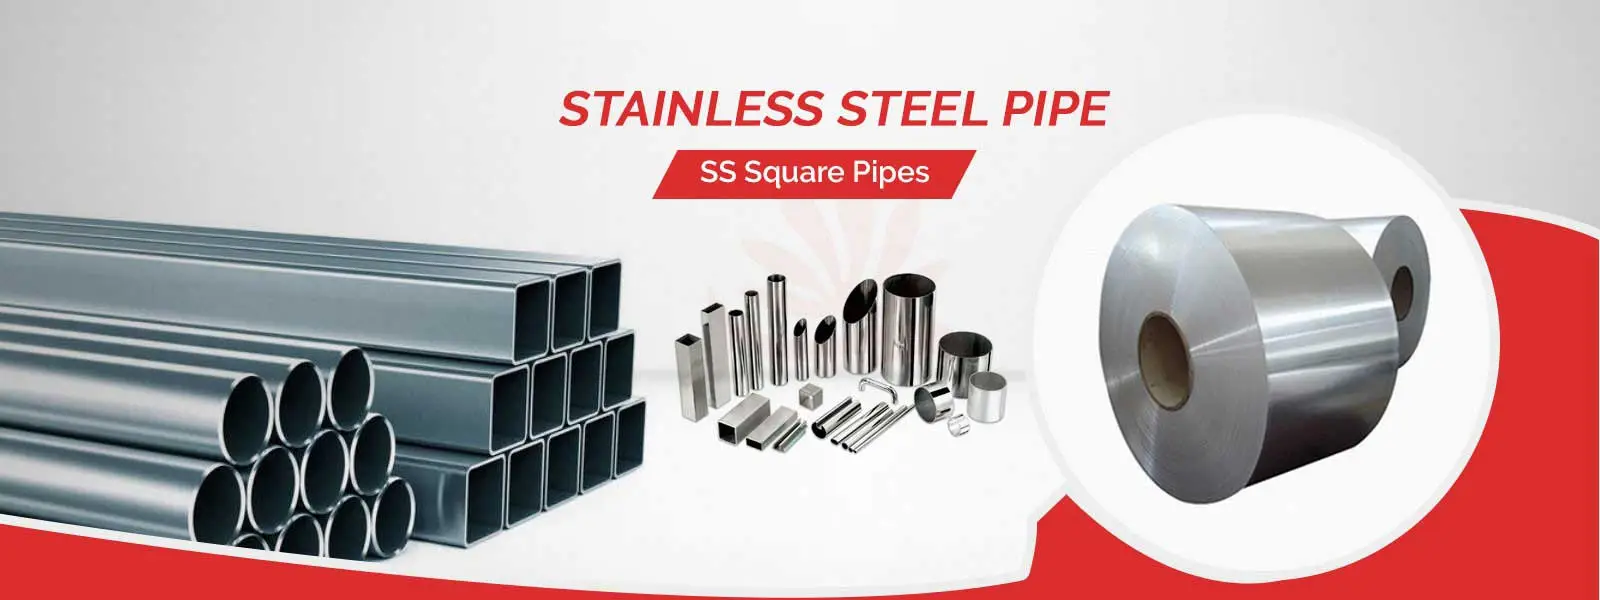 Stainless Steel Pipe Manufacturers in Faridabad